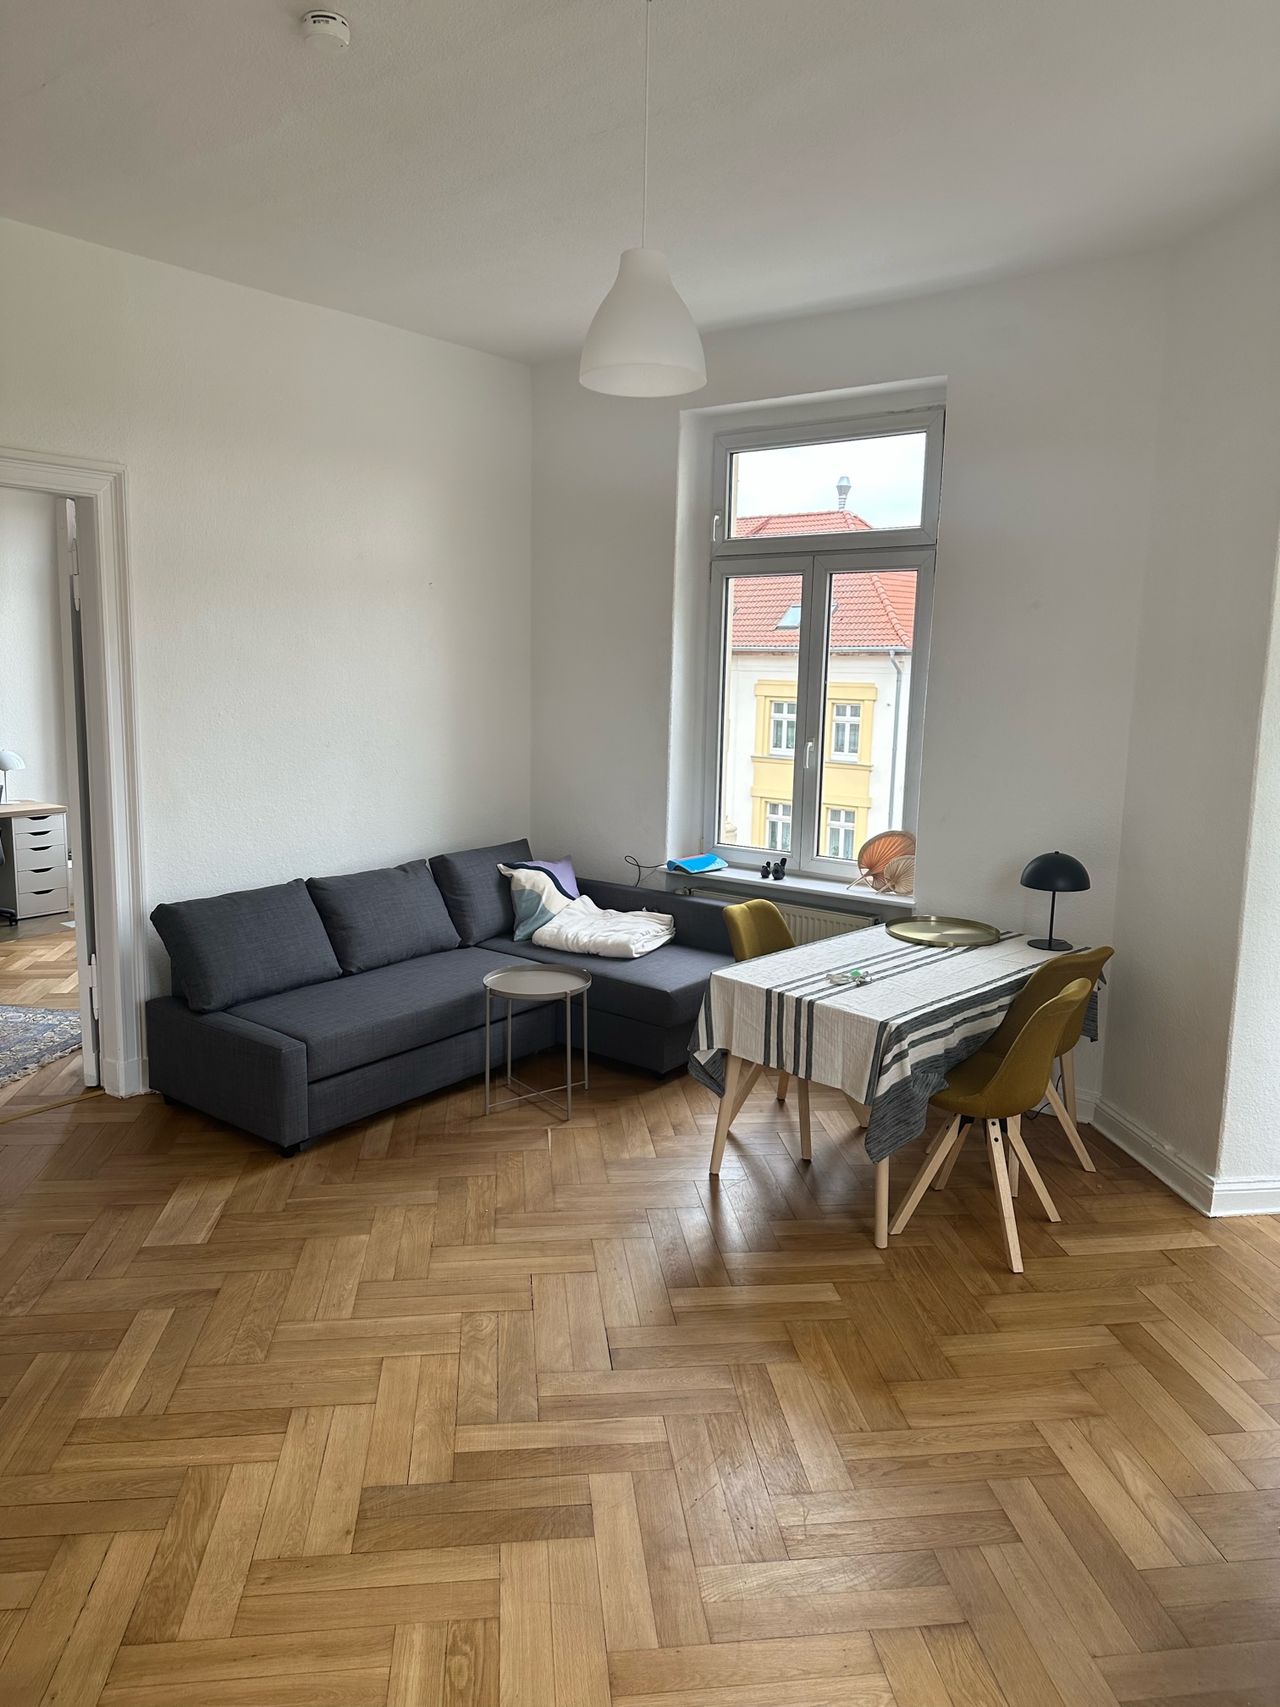 Sunny and spacious apartment in excellent location (Magdeburg)